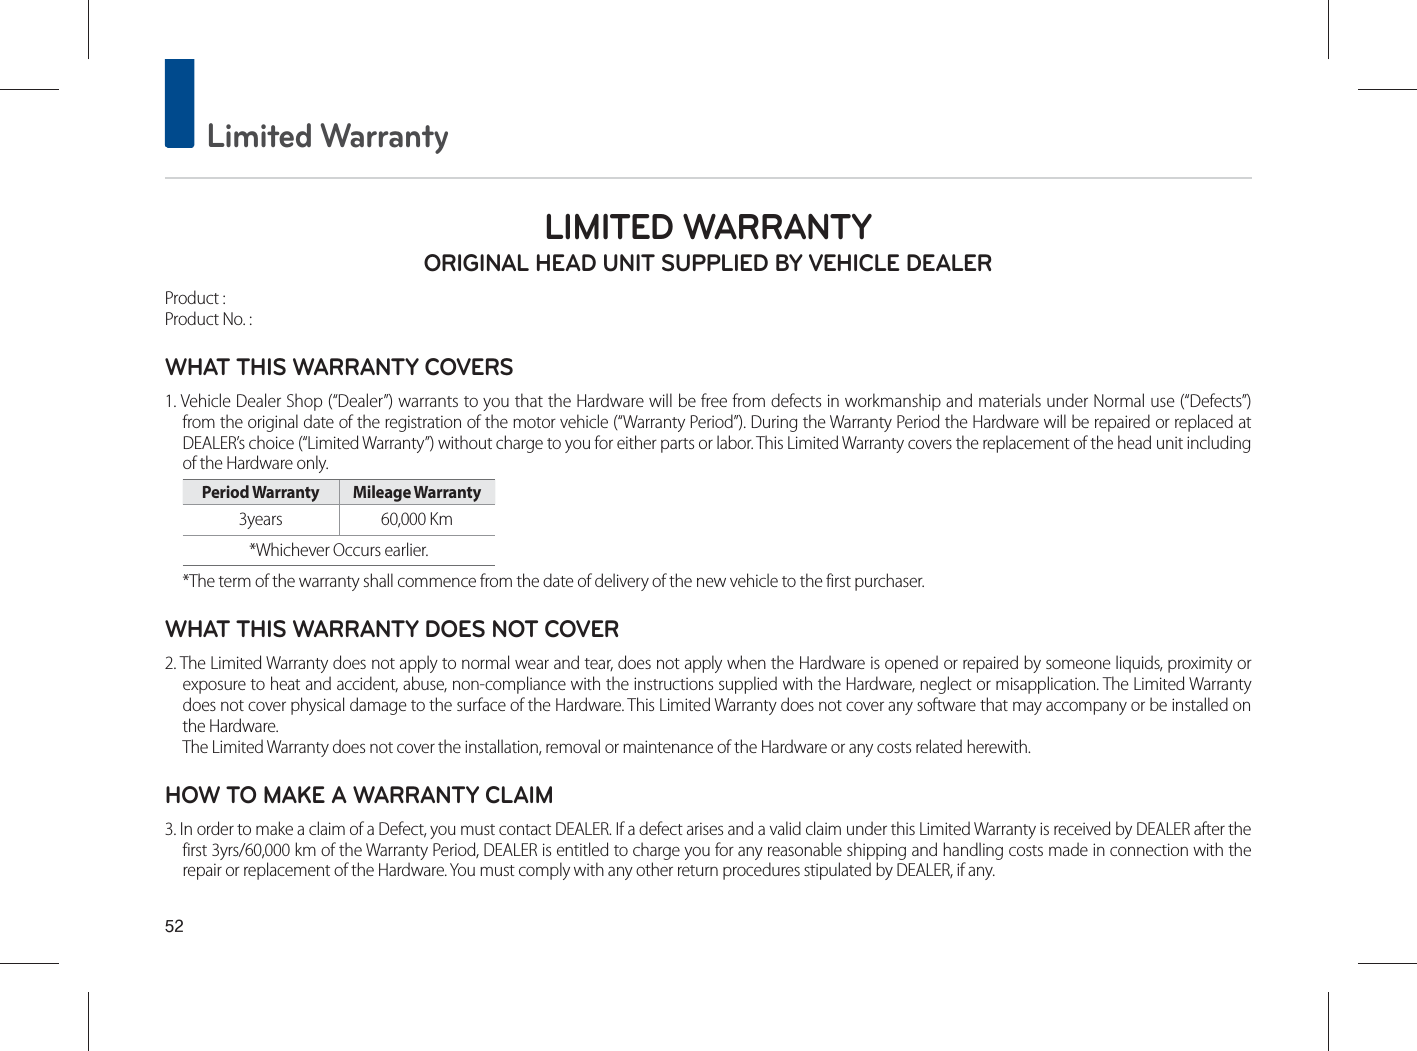  Limited WarrantyLIMITED WARRANTY ORIGINAL HEAD UNIT SUPPLIED BY VEHICLE DEALER Product : Product No. : WHAT THIS WARRANTY COVERS 1. Vehicle Dealer Shop (“Dealer”) warrants to you that the Hardware will be free from defects in workmanship and materials under Normal use (“Defects”)from the original date of the registration of the motor vehicle (“Warranty Period”). During the Warranty Period the Hardware will be repaired or replaced atDEALER’s choice (“Limited Warranty”) without charge to you for either parts or labor. This Limited Warranty covers the replacement of the head unit including of the Hardware only. Period Warranty  Mileage Warranty 3years 60,000 Km *Whichever Occurs earlier.*The term of the warranty shall commence from the date of delivery of the new vehicle to the first purchaser.WHAT THIS WARRANTY DOES NOT COVER 2. The Limited Warranty does not apply to normal wear and tear, does not apply when the Hardware is opened or repaired by someone liquids, proximity orexposure to heat and accident, abuse, non-compliance with the instructions supplied with the Hardware, neglect or misapplication. The Limited Warrantydoes not cover physical damage to the surface of the Hardware. This Limited Warranty does not cover any software that may accompany or be installed on the Hardware. The Limited Warranty does not cover the installation, removal or maintenance of the Hardware or any costs related herewith.HOW TO MAKE A WARRANTY CLAIM3. In order to make a claim of a Defect, you must contact DEALER. If a defect arises and a valid claim under this Limited Warranty is received by DEALER after the first 3yrs/60,000 km of the Warranty Period, DEALER is entitled to charge you for any reasonable shipping and handling costs made in connection with therepair or replacement of the Hardware. You must comply with any other return procedures stipulated by DEALER, if any.